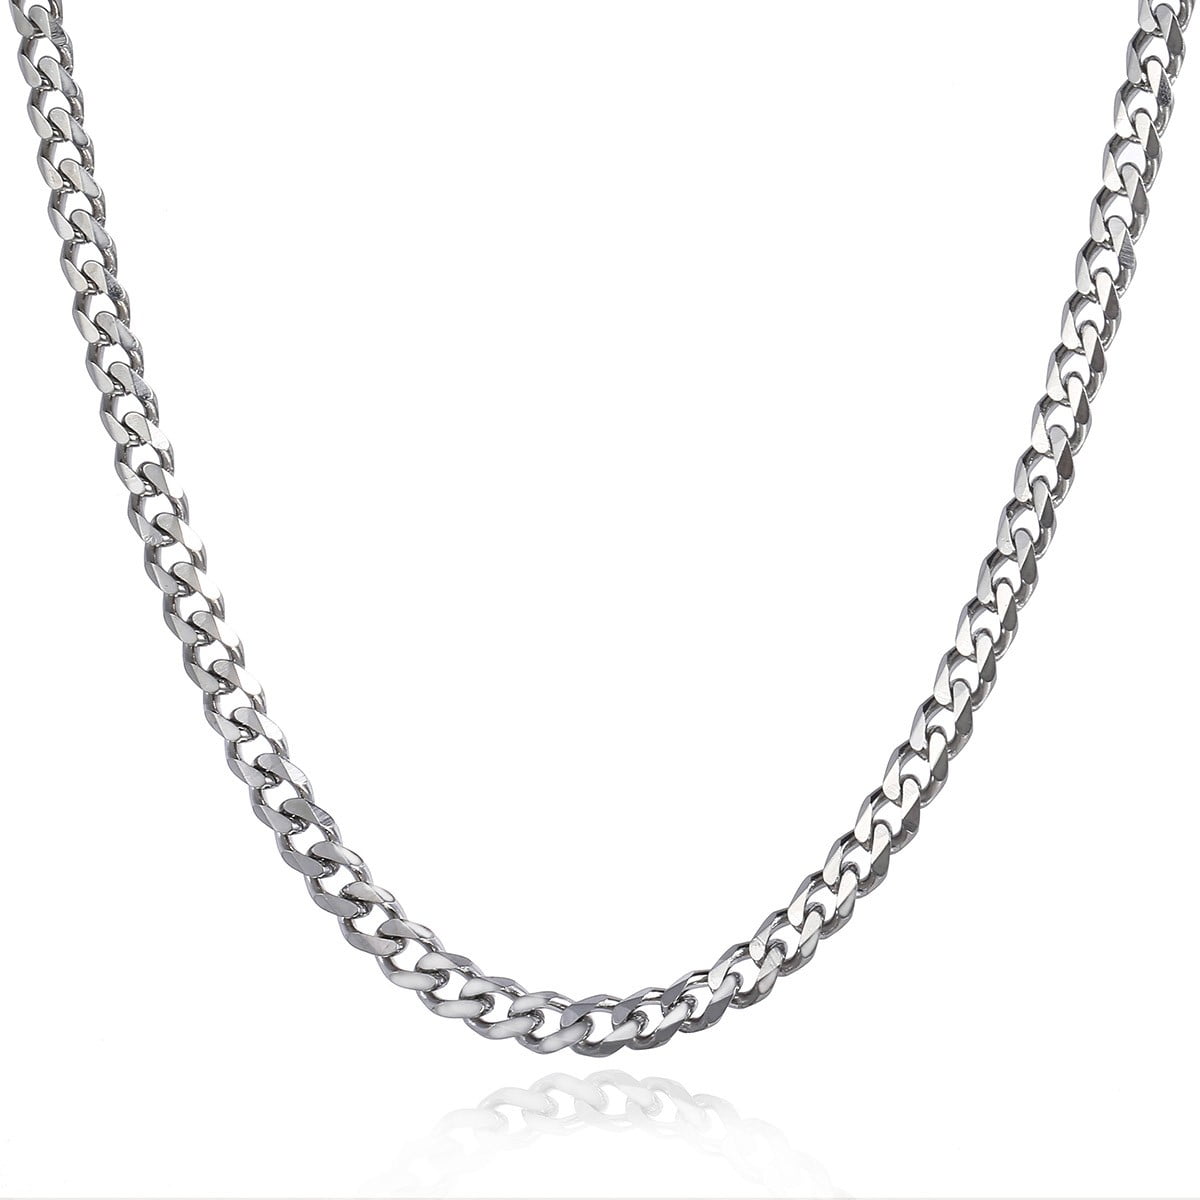 Jewels Obsession Tennis Racquets Necklace Rhodium-plated 925 Silver Tennis Racquets Pendant with 24 Necklace